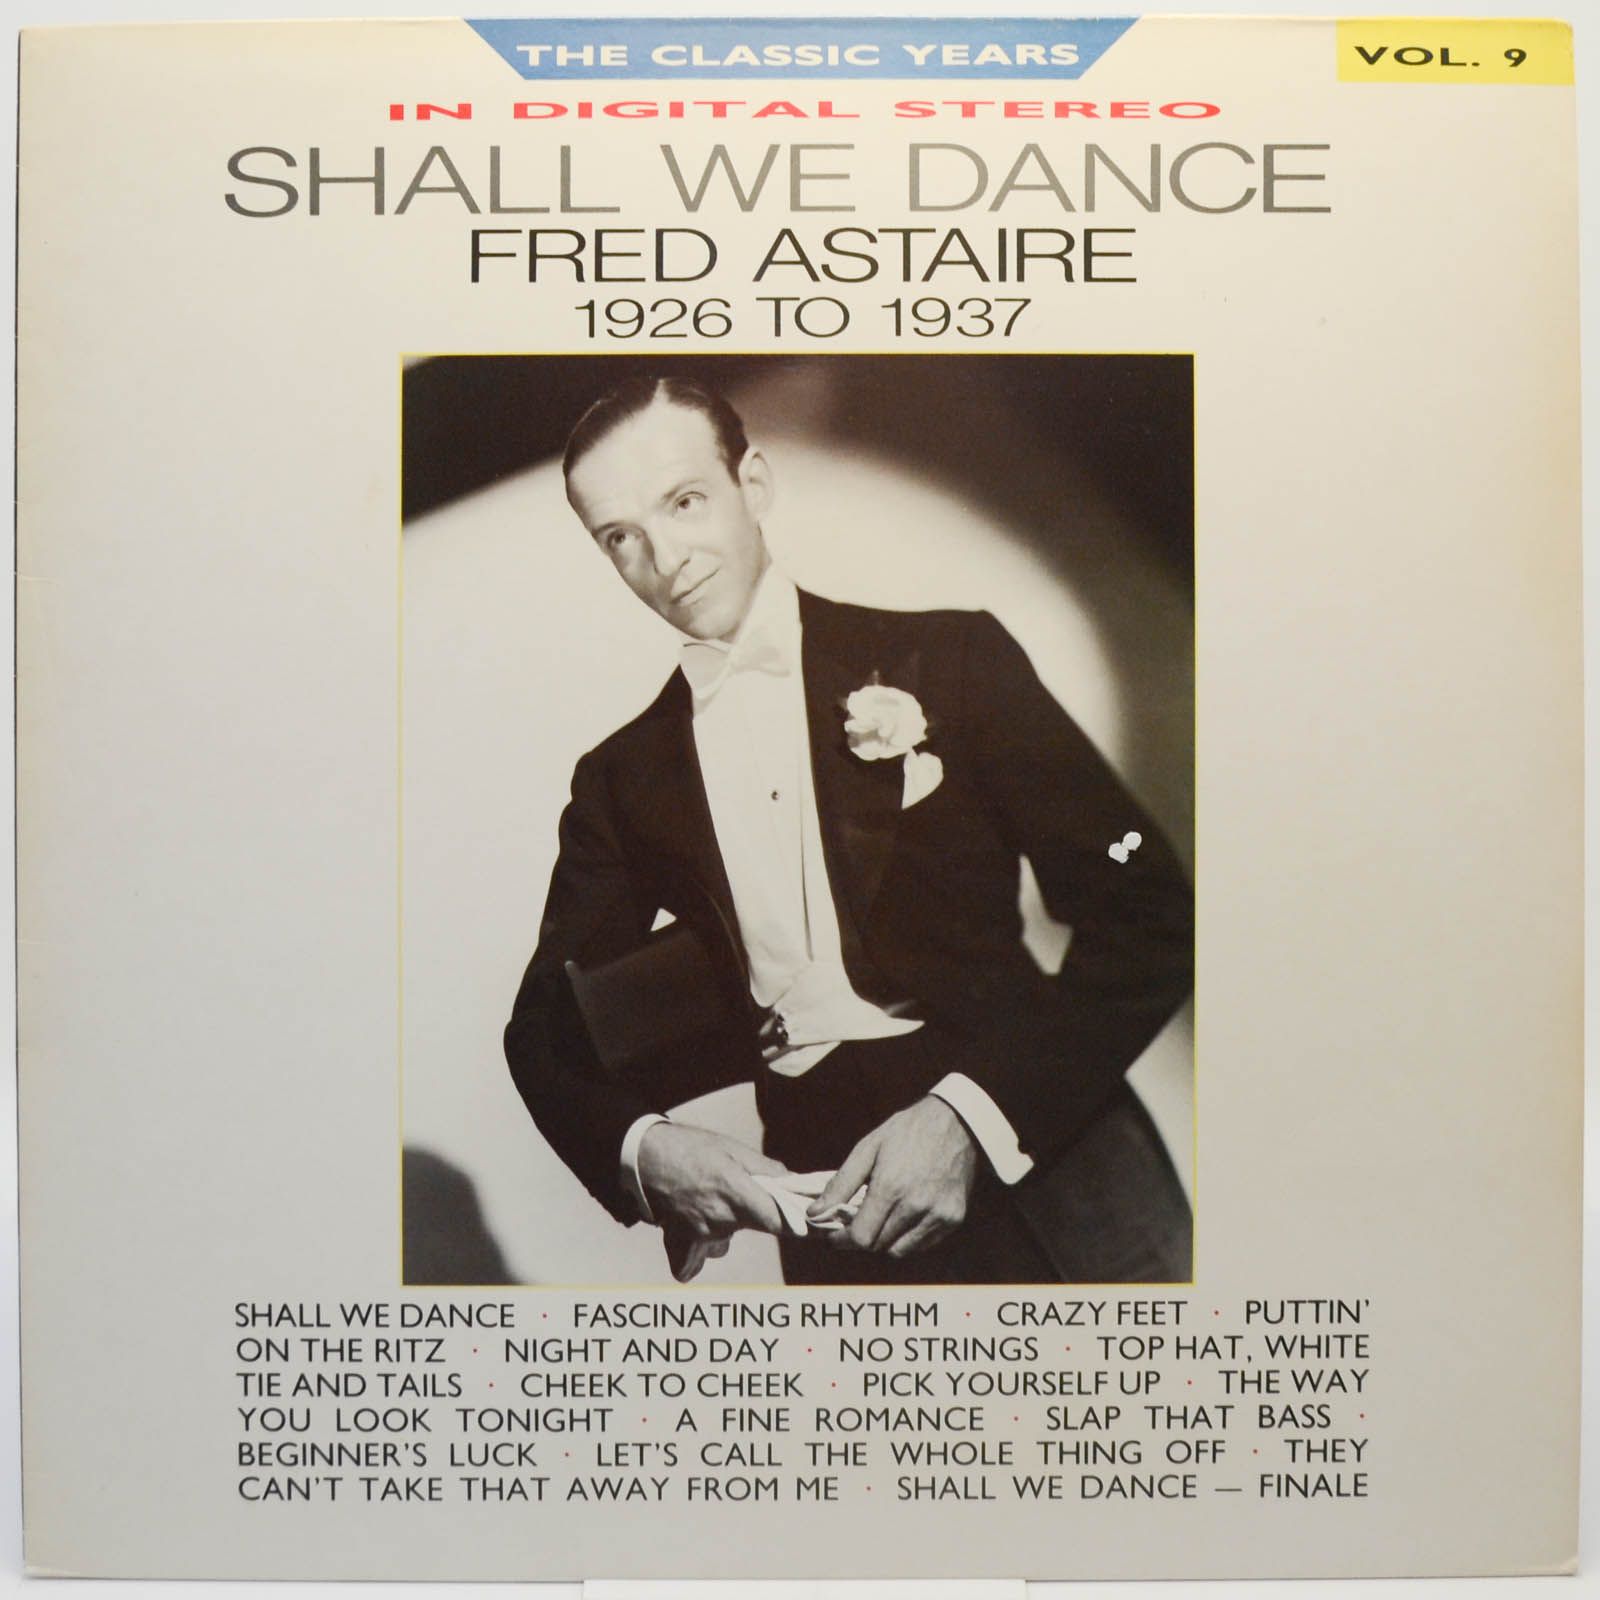 Fred Astaire — Shall We Dance - 1926 To 1937, 1988